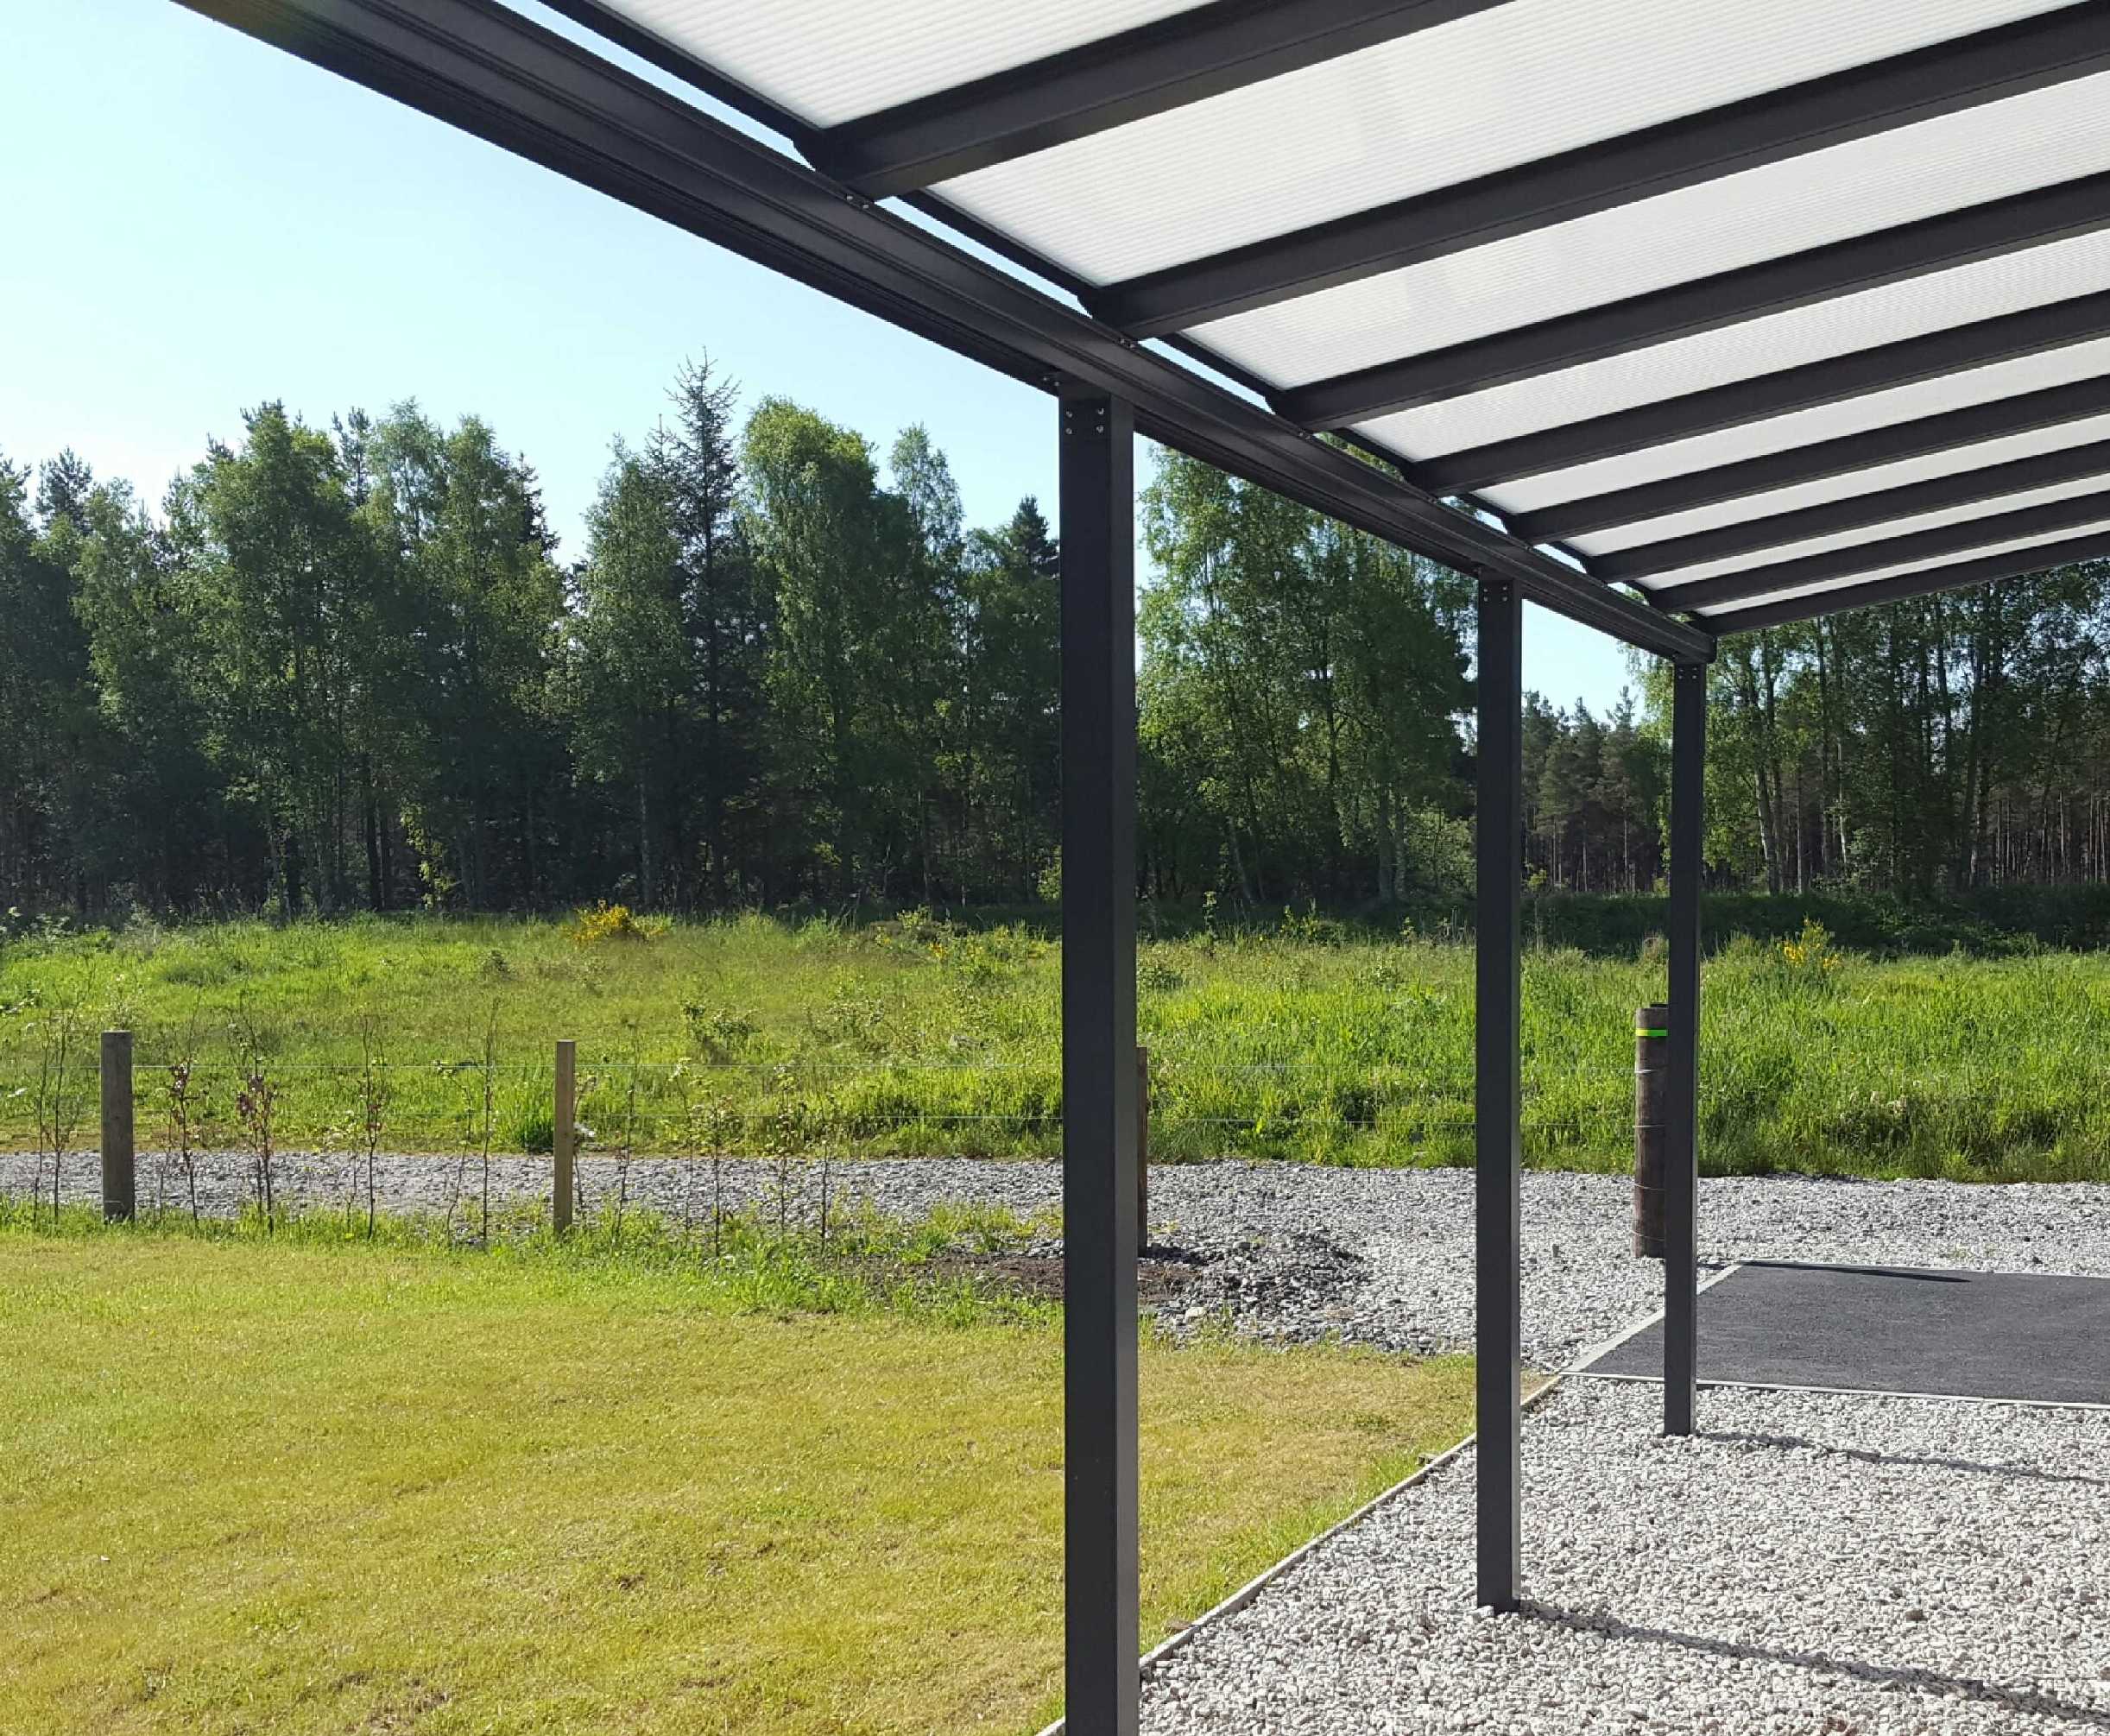 SPECIAL OFFER Omega Smart Lean-To Canopy, Anthracite Grey, 16mm Polycarbonate Glazing - 3.1m (W) x 2.0m (P), (2) Supporting Posts